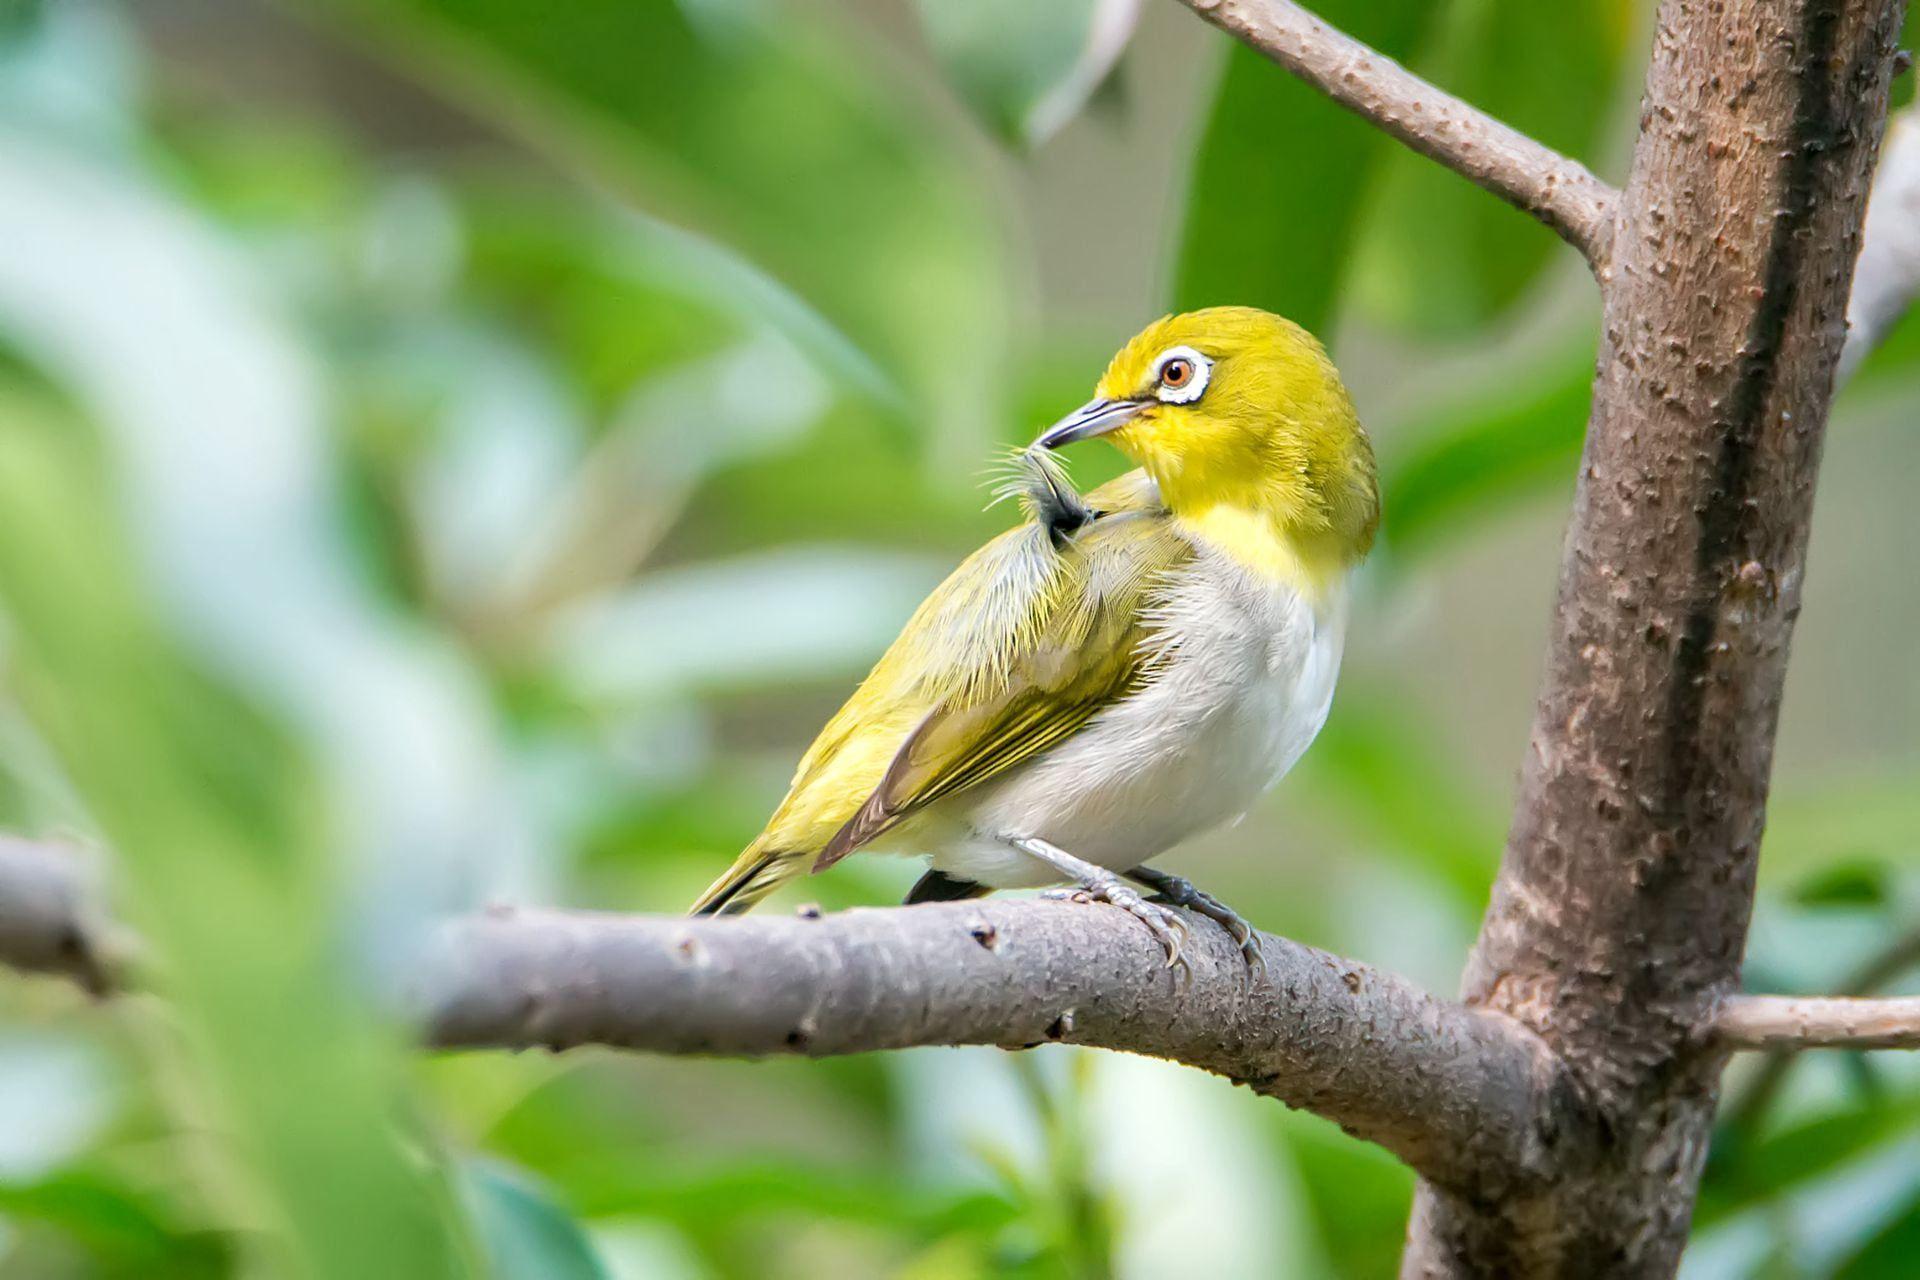 Yellow and white bird on tree branch during daytime, japanese